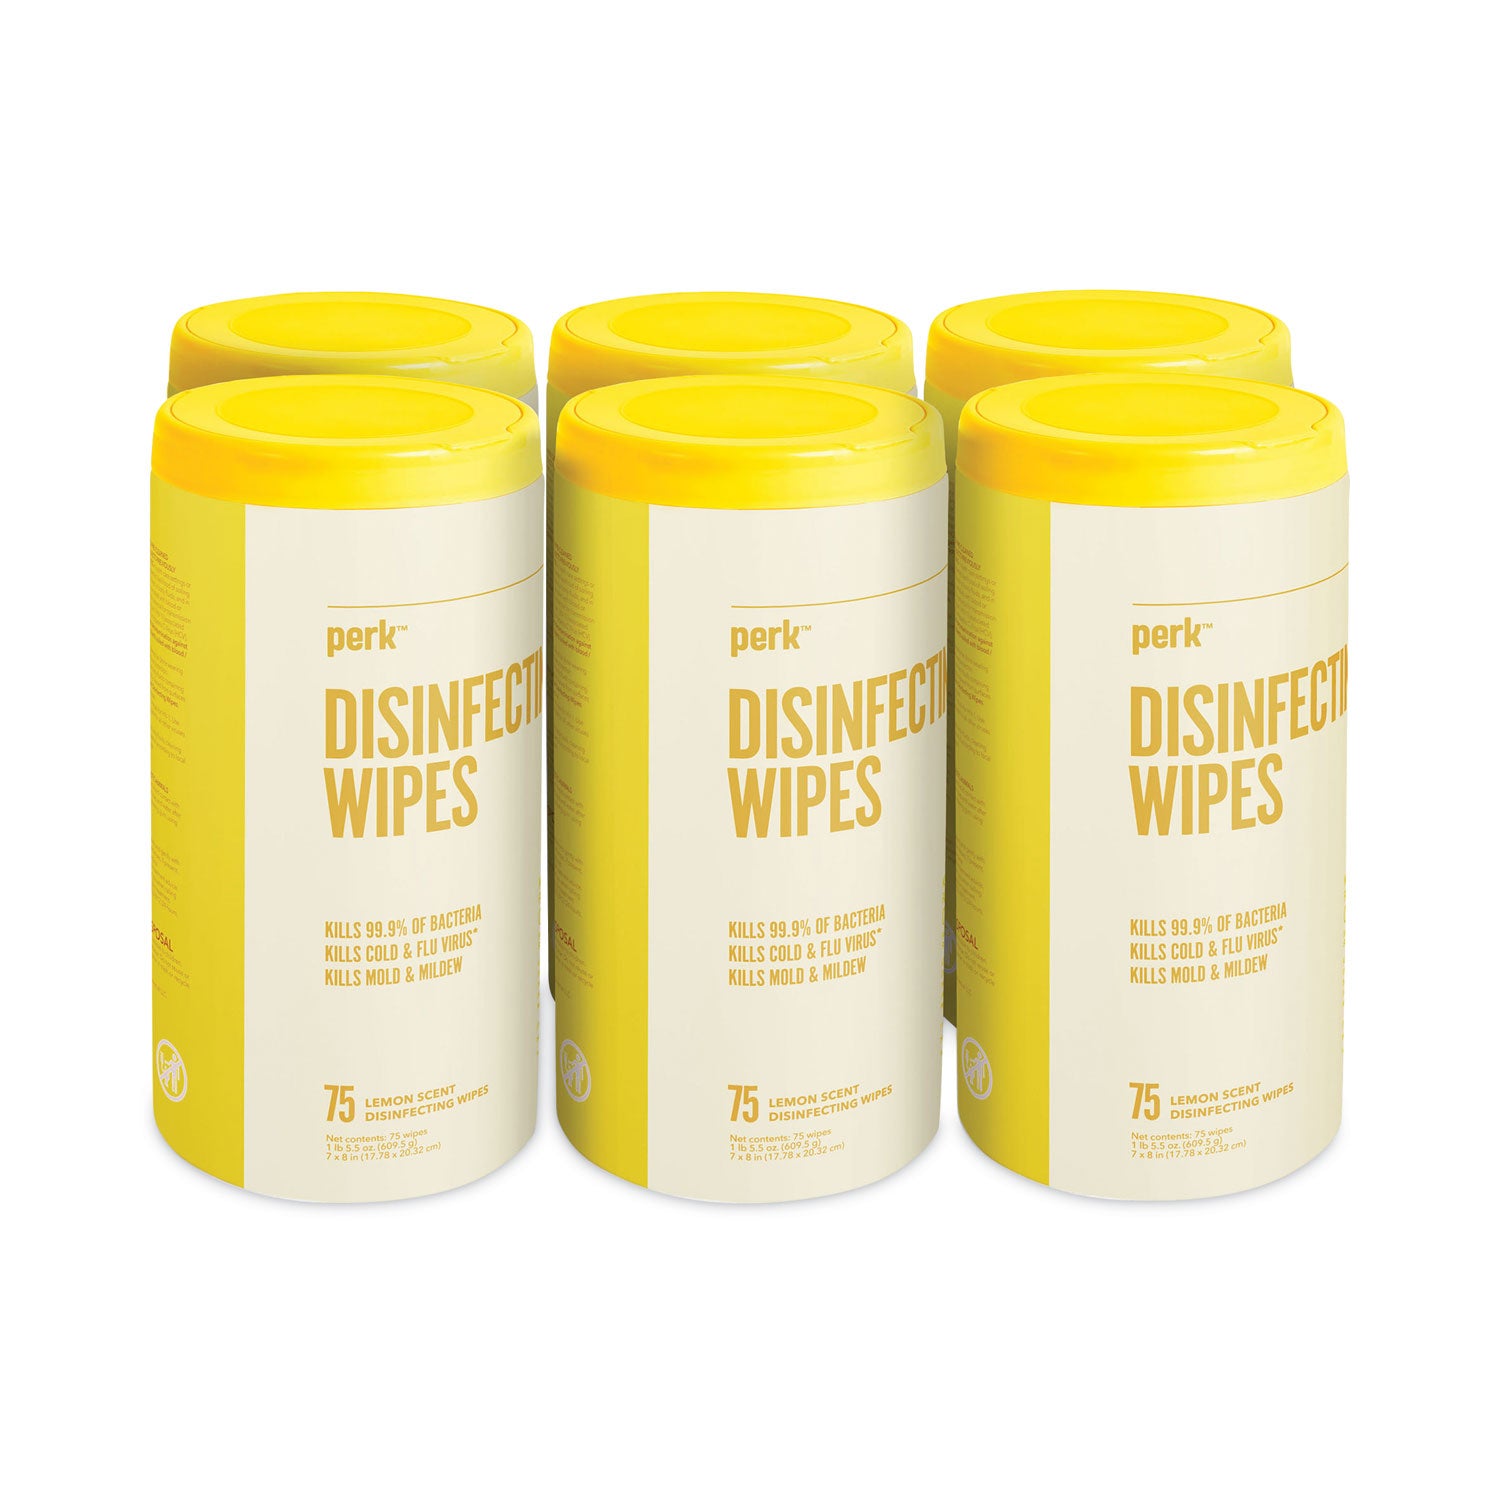 disinfecting-wipes-7-x-8-lemon-white-75-wipes-canister-6-canisters-carton_prk56665ct - 2